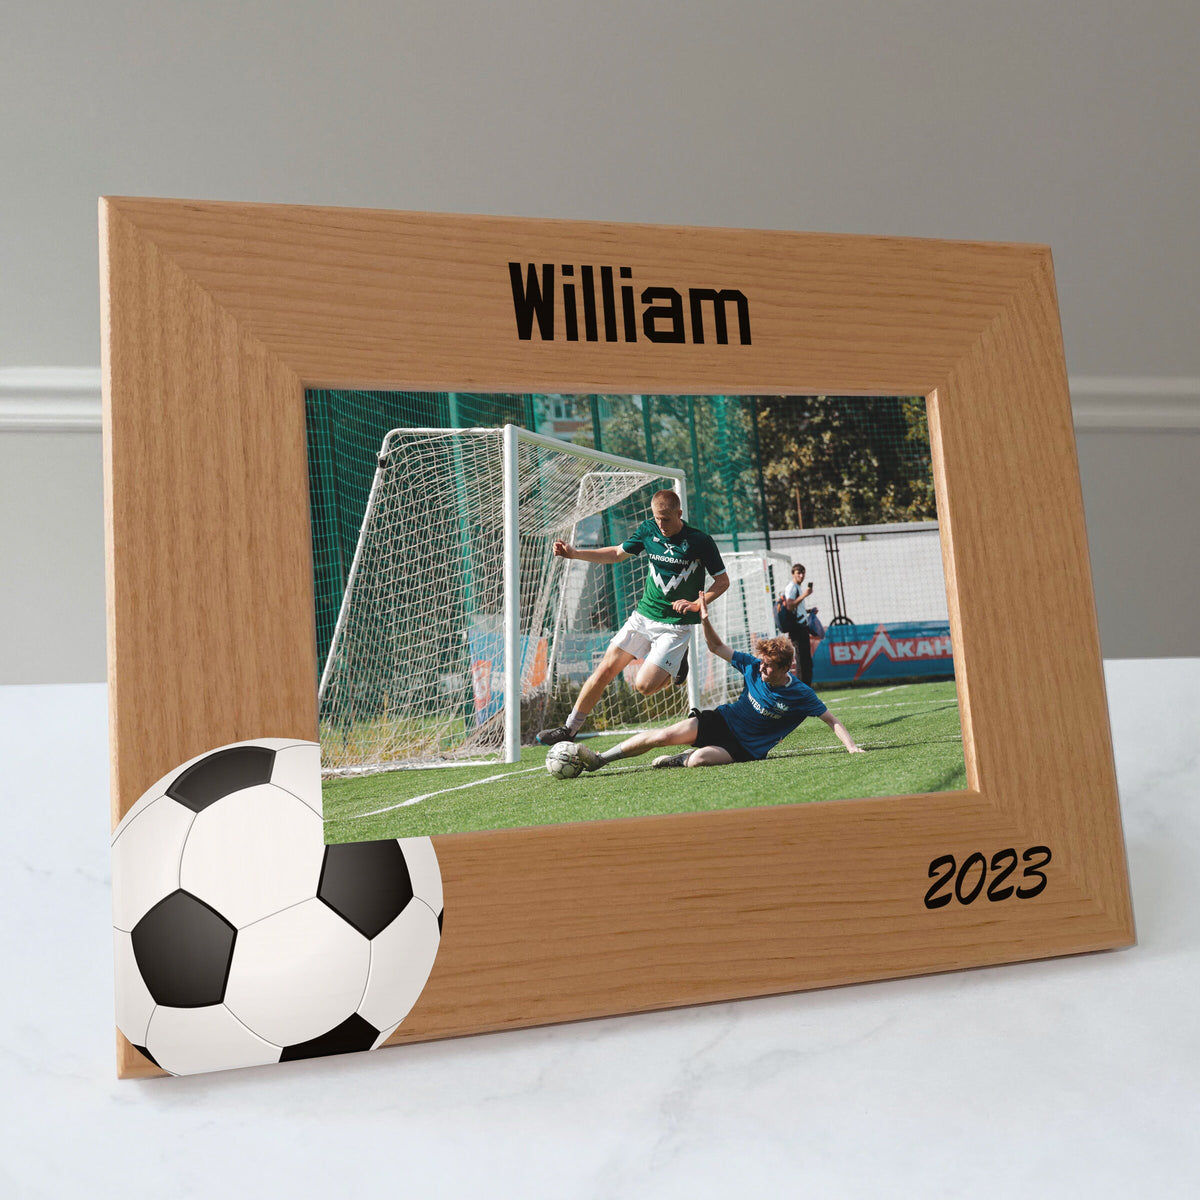 Soccer picture frame personalized, Soccer gift / 4x6 photo frame / Printed